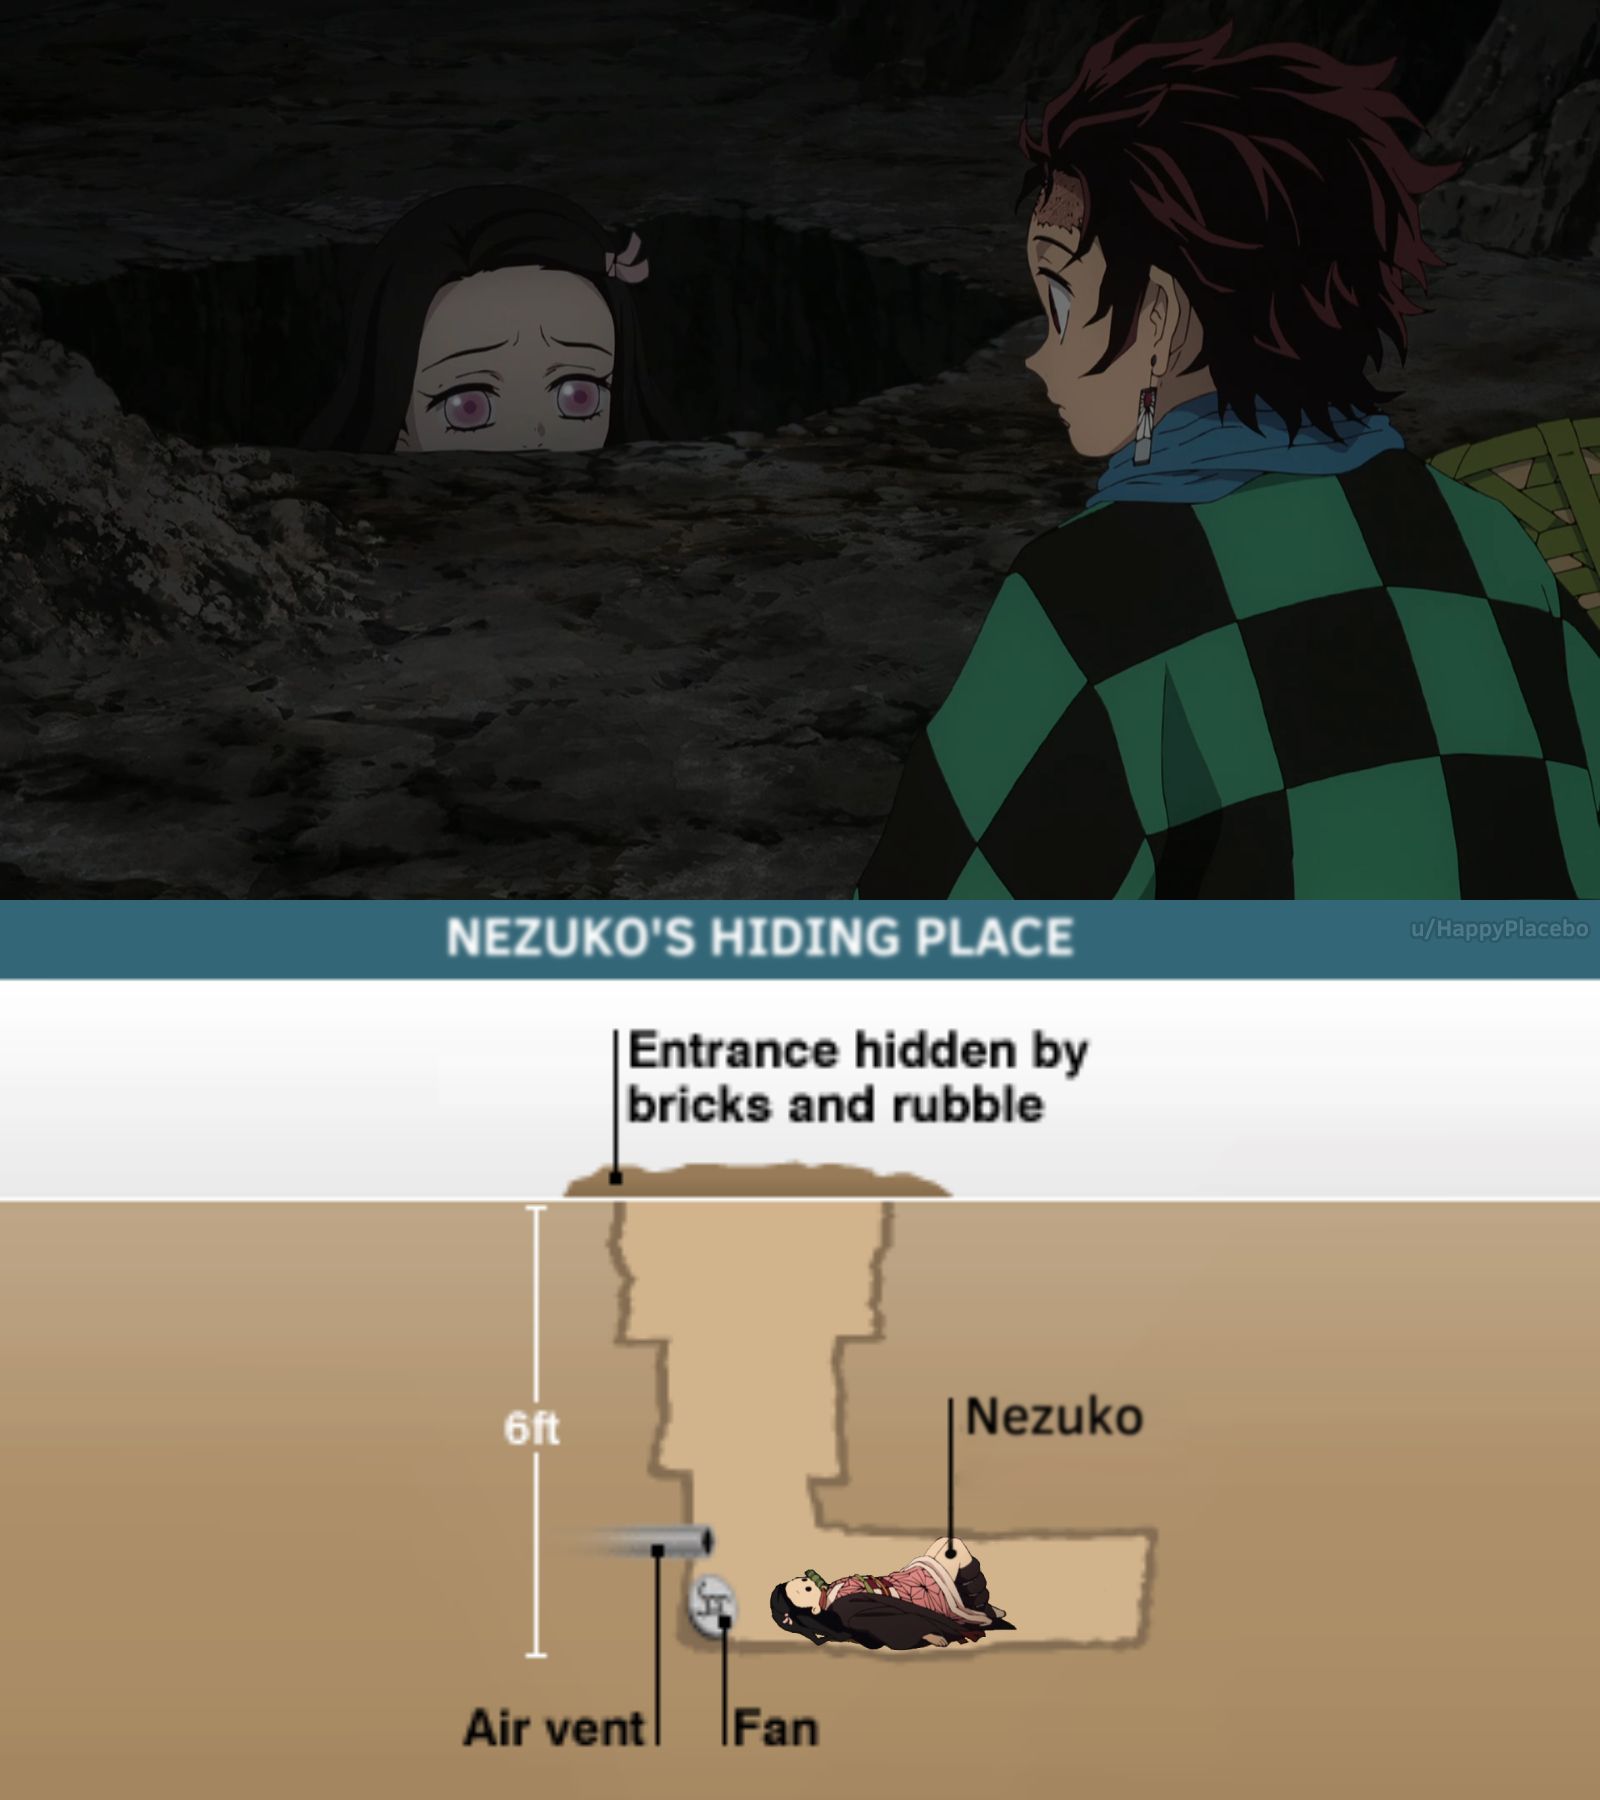 So this is what Nezuko's first hiding place looks like.